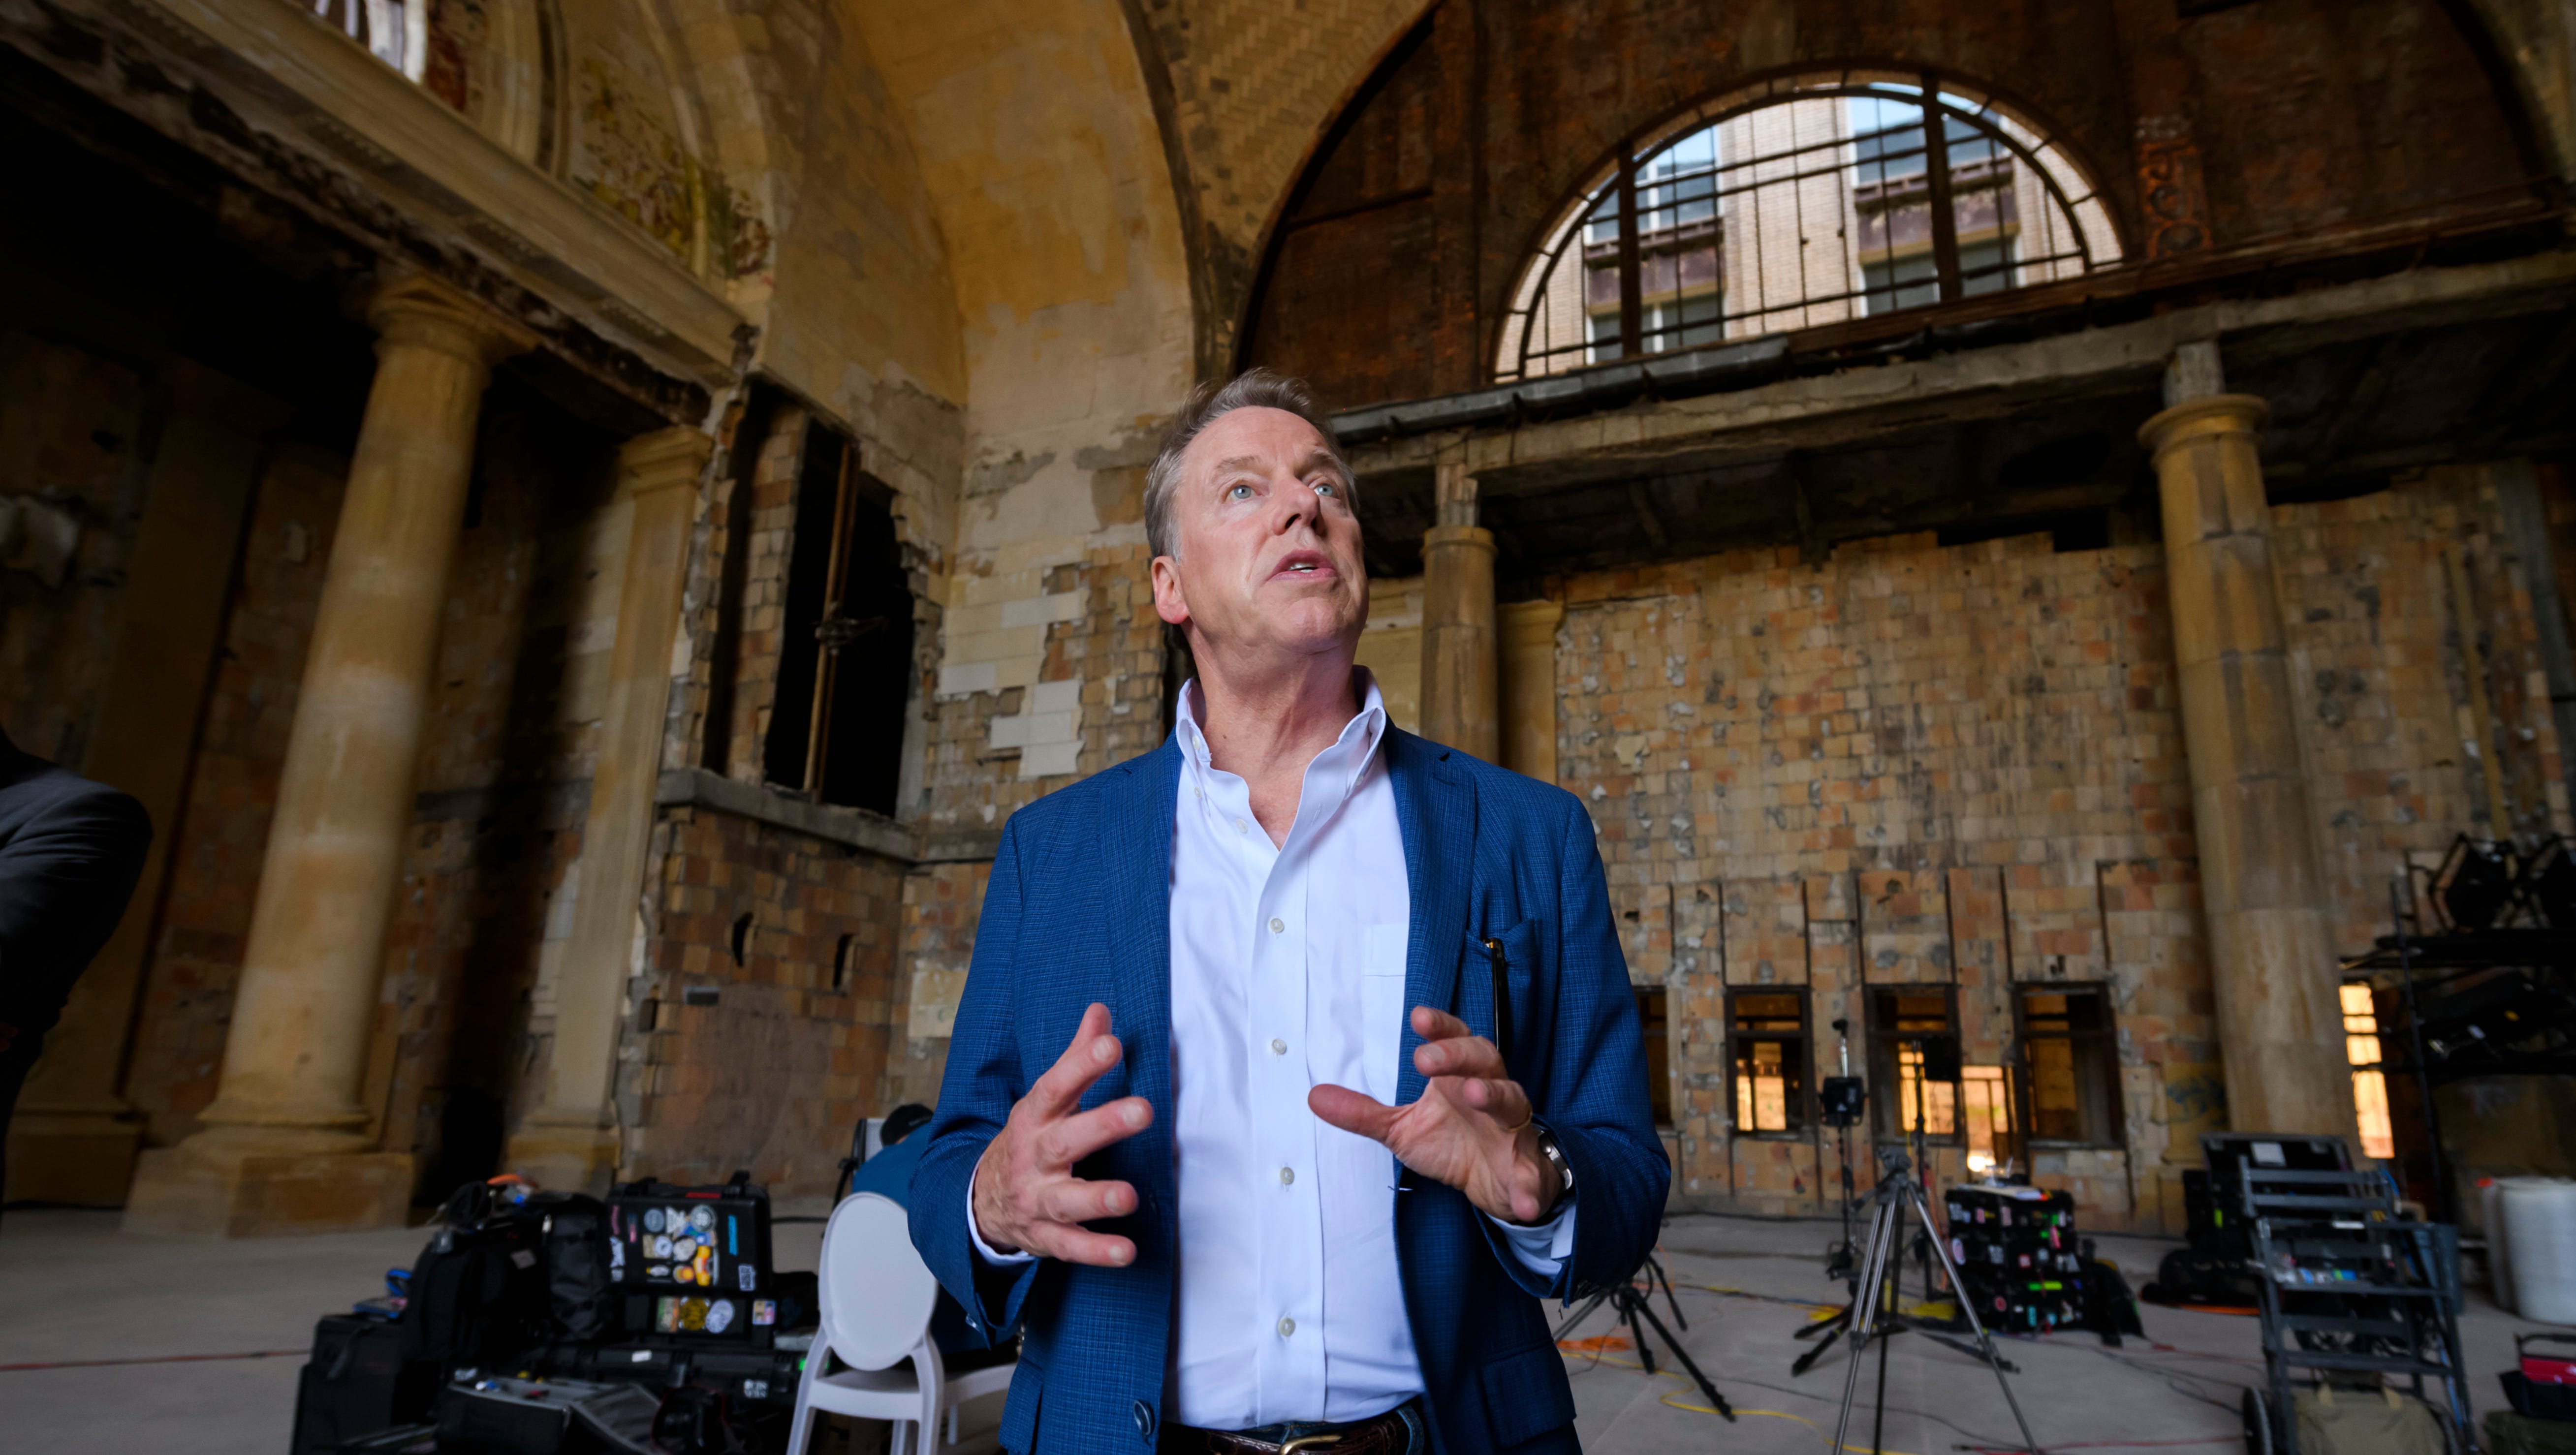 "One thing I don't want to do is take a beautiful building and put something that's garish on there," Bill Ford Jr. said. "
"We don't want to be isolated and we don't want to be seen as taking over the community by any means."